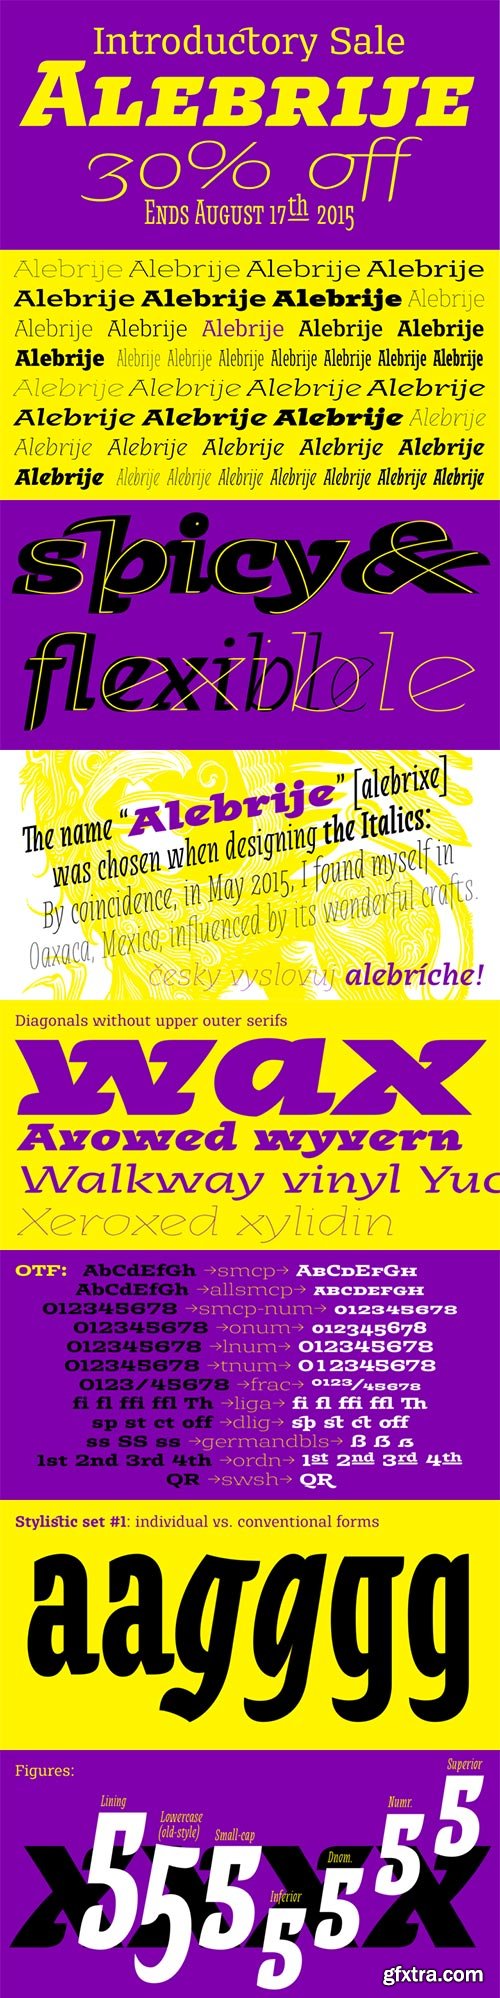 Alebrije - Diagonals Without Upper Outer Serifs 42xOTF $332 NEW!